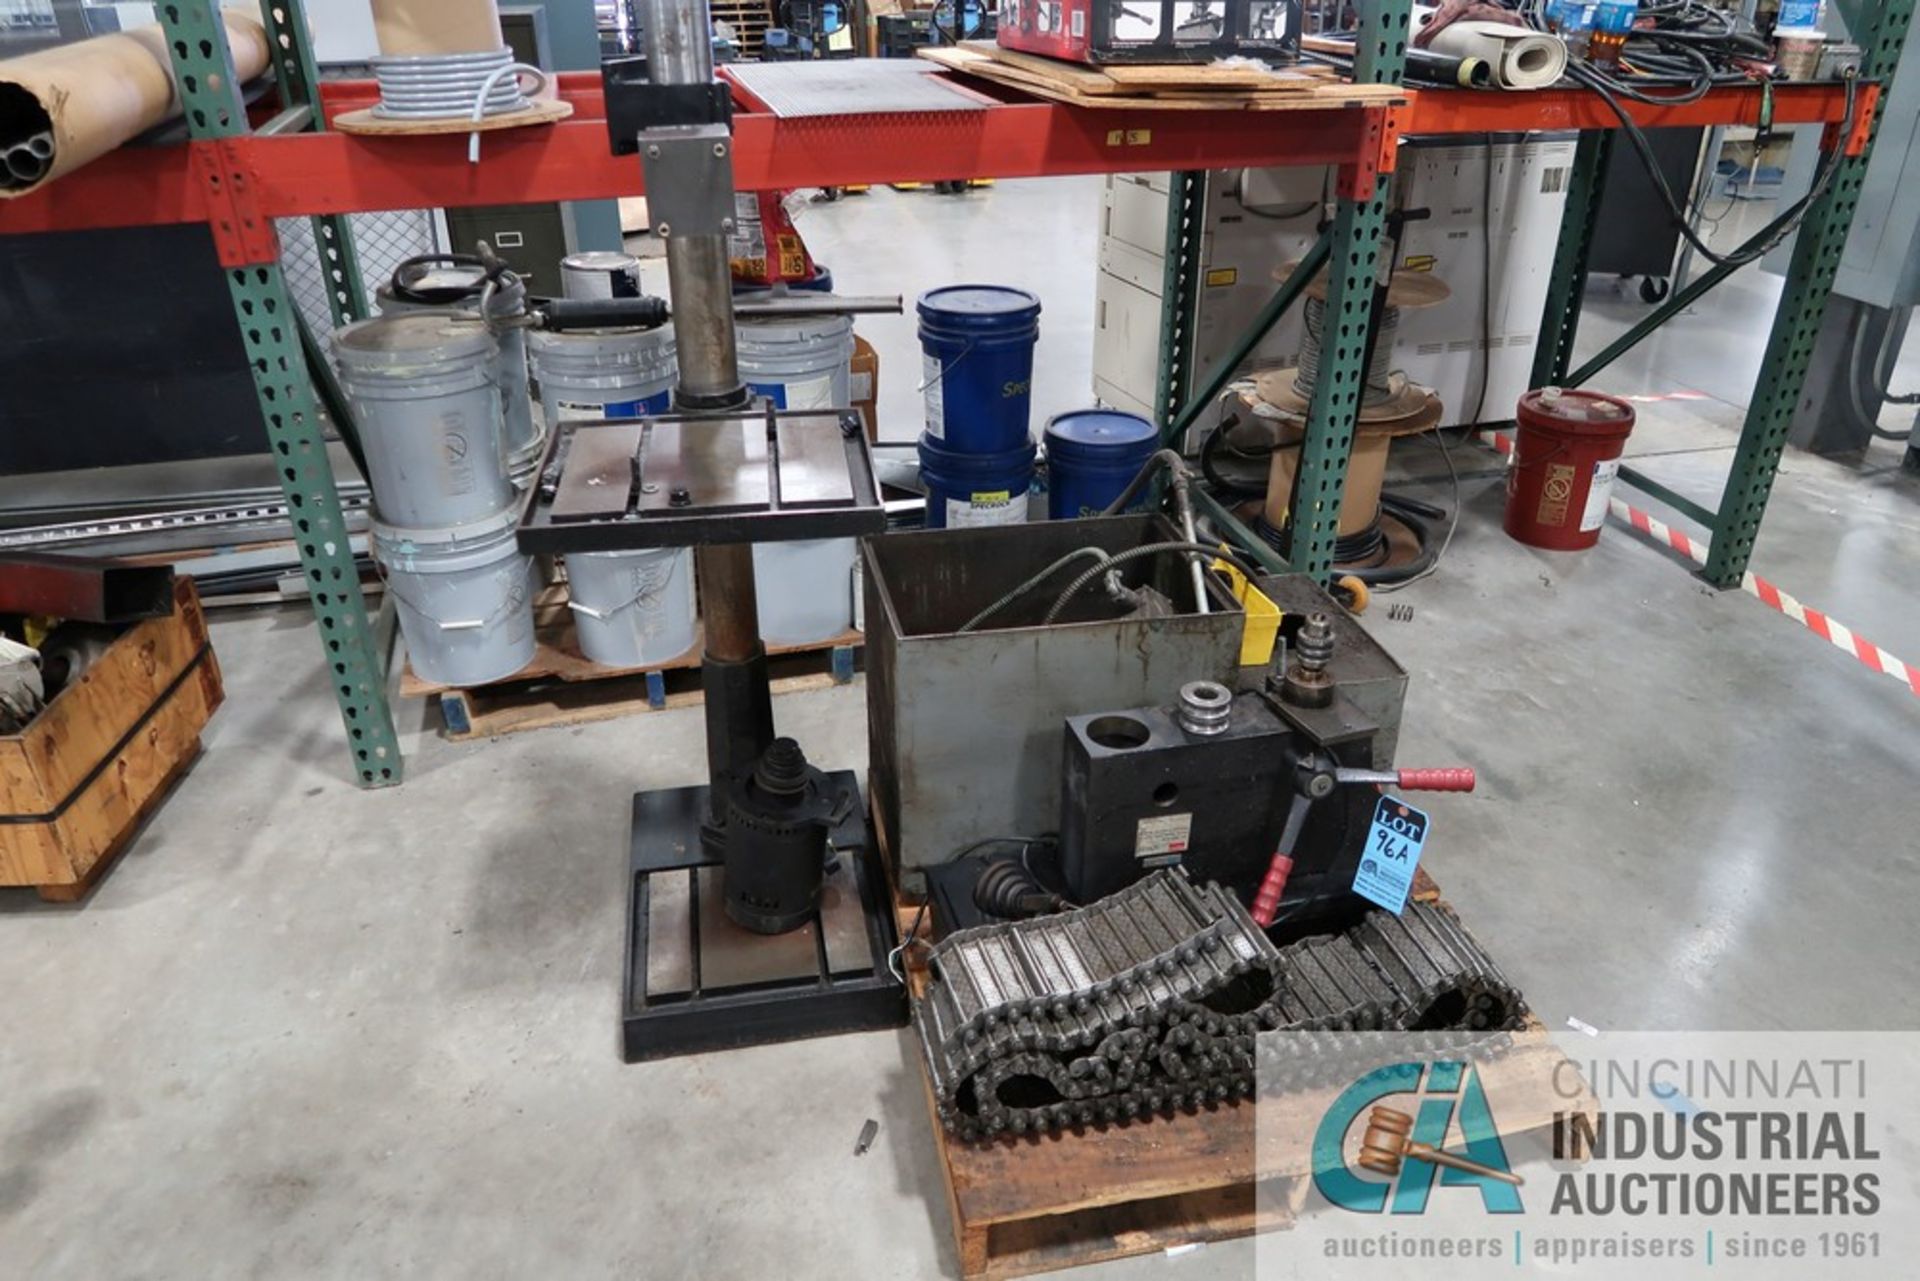 DAYTON MODEL 3Z919F DRILL PRESS, IN PIECES, BASE AND DRILL HEAD, METAL BELT CONVEYOR, COOLANT TANK